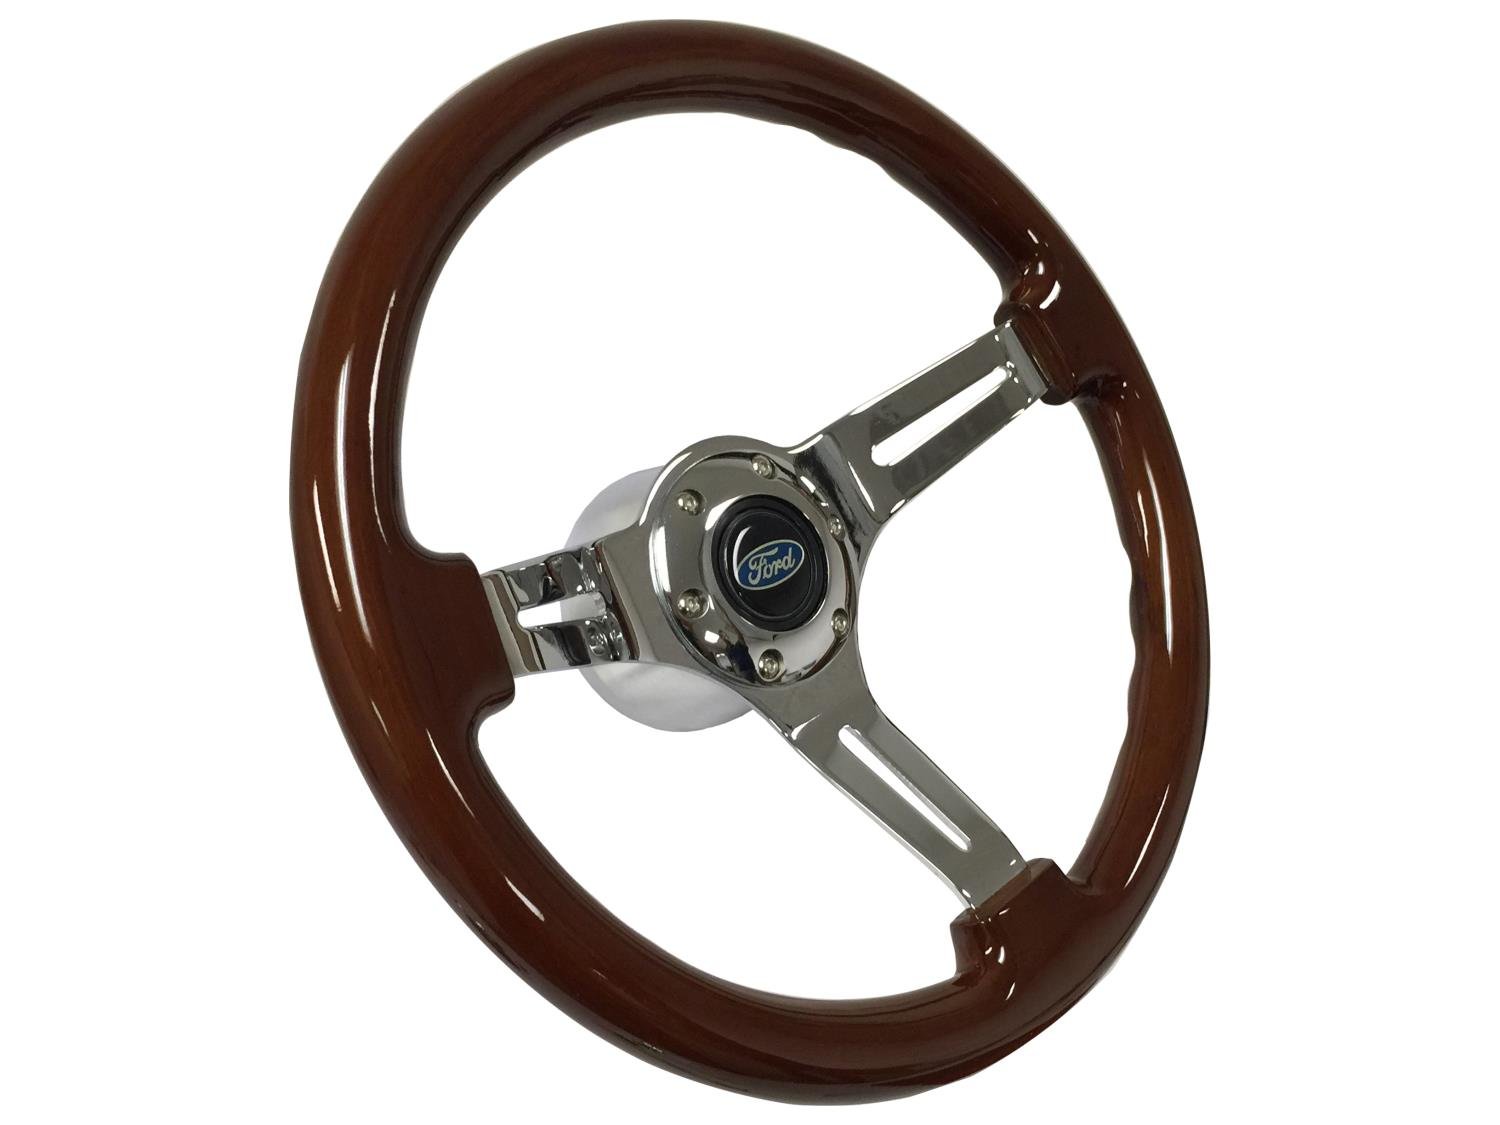 S6 Sport Steering Wheel Kit for 1964-1972 Ford/Mercury, 14 in. Diameter, Mahogany Wood Grip, with 6-Bolt Adapter and Horn Button